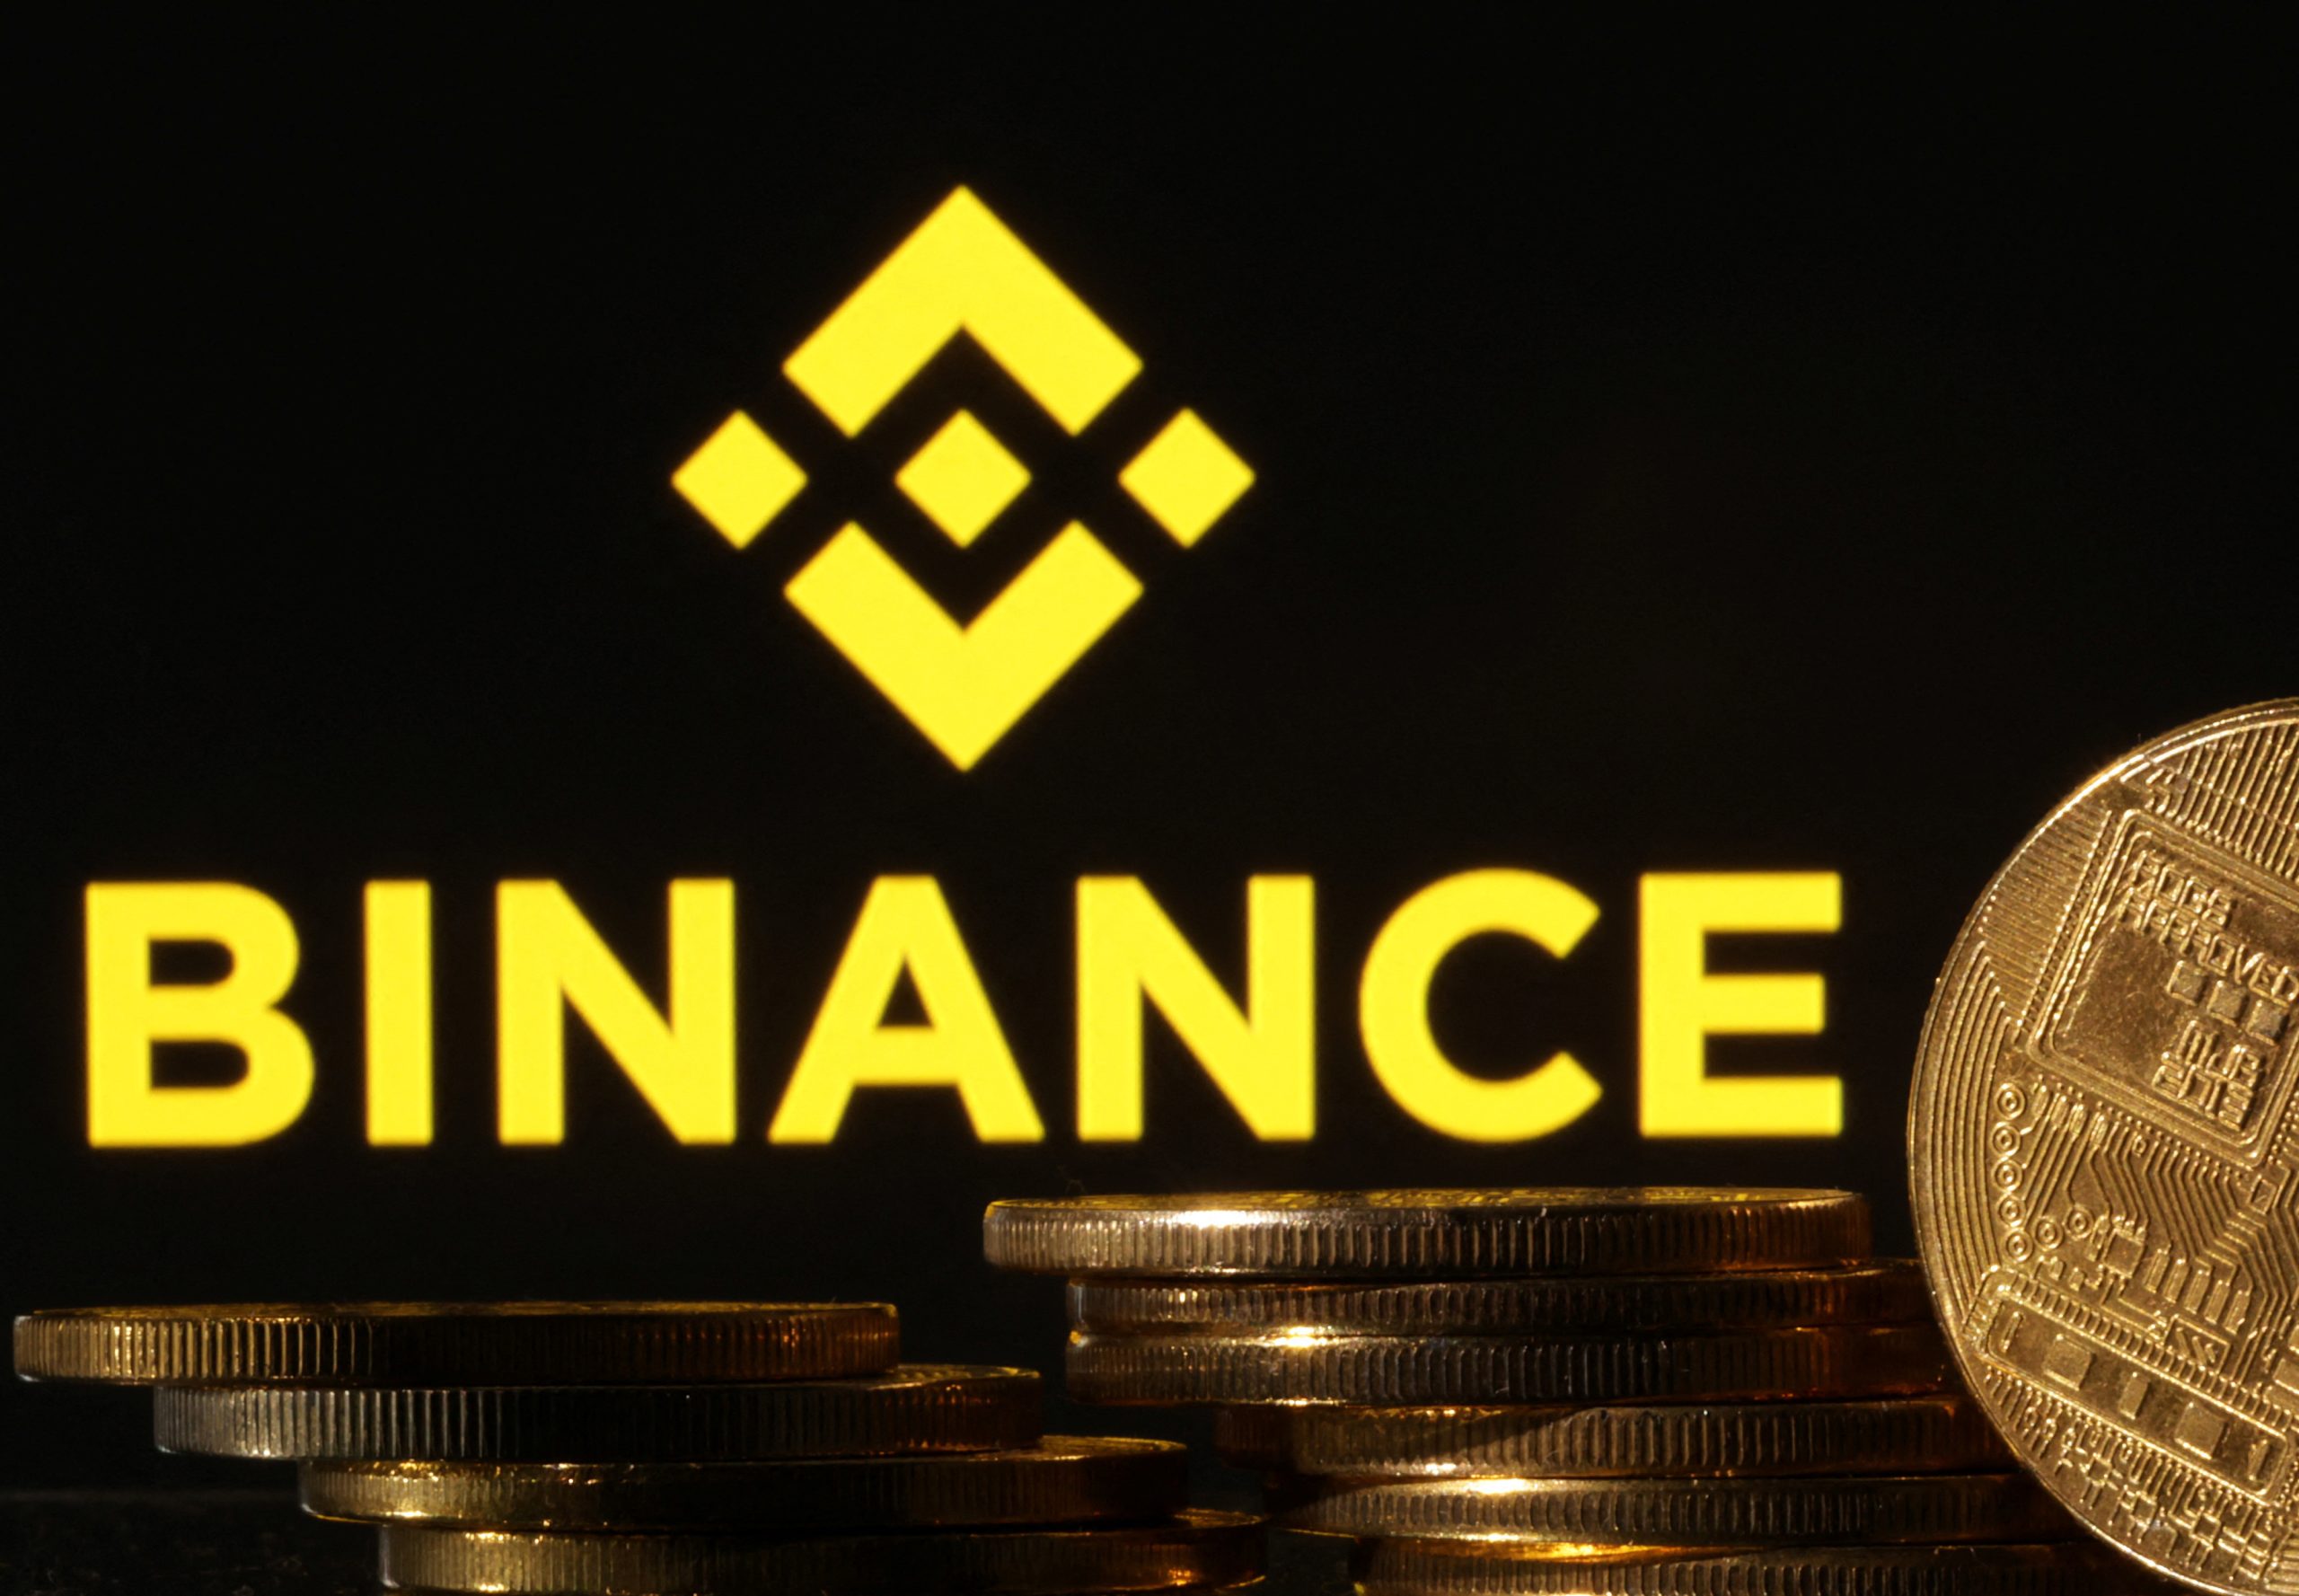 Binance - Cryptocurrency Exchange for Bitcoin, Ethereum